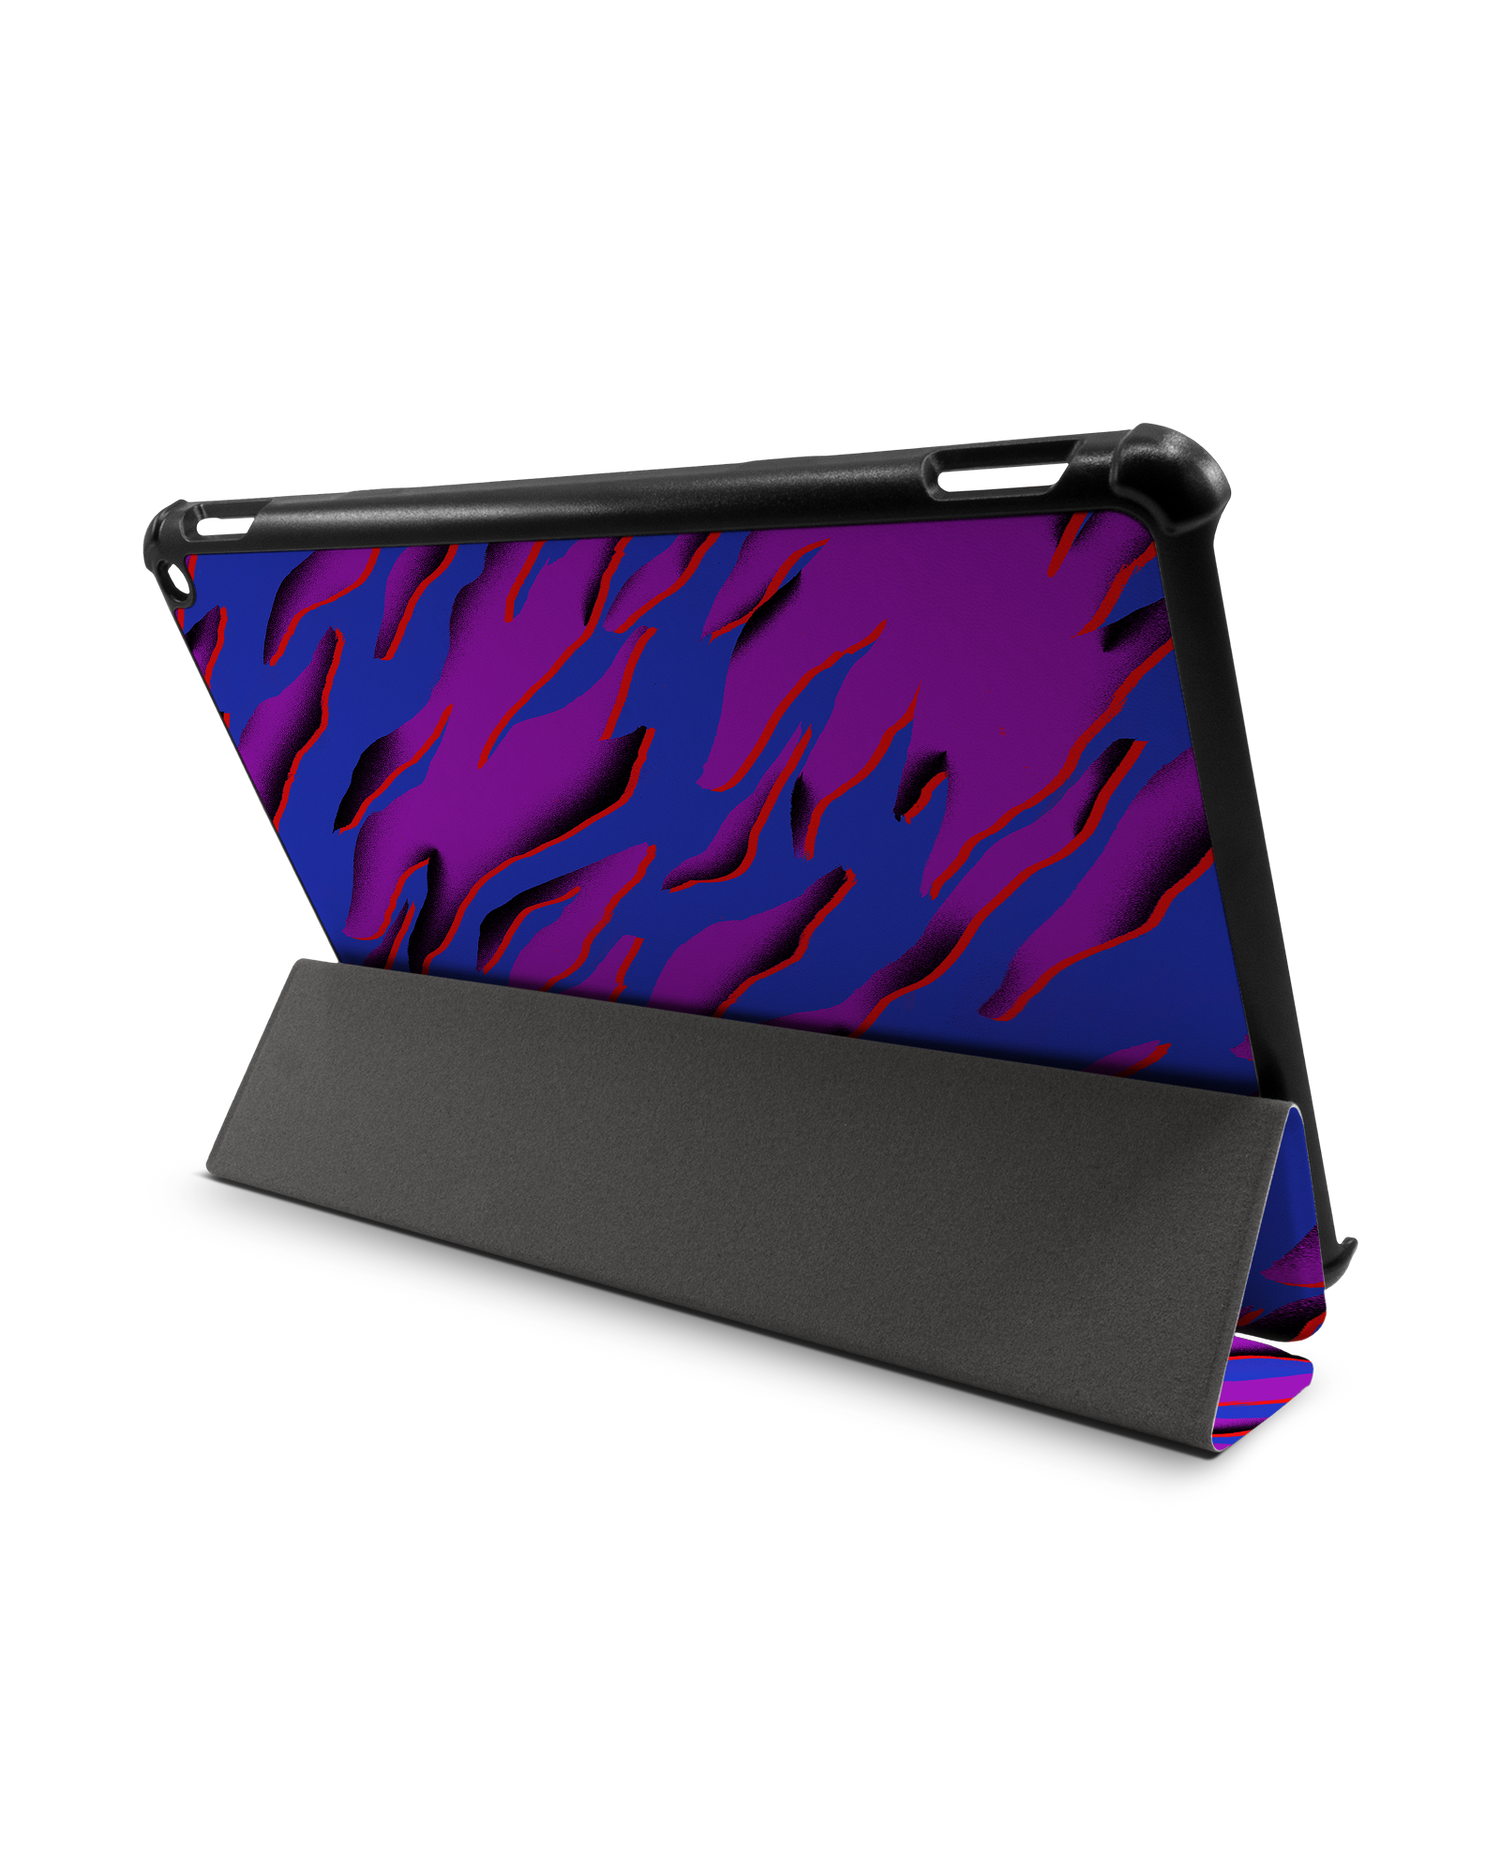 Electric Ocean 2 Tablet Smart Case for Amazon Fire HD 10 (2021): Used as Stand